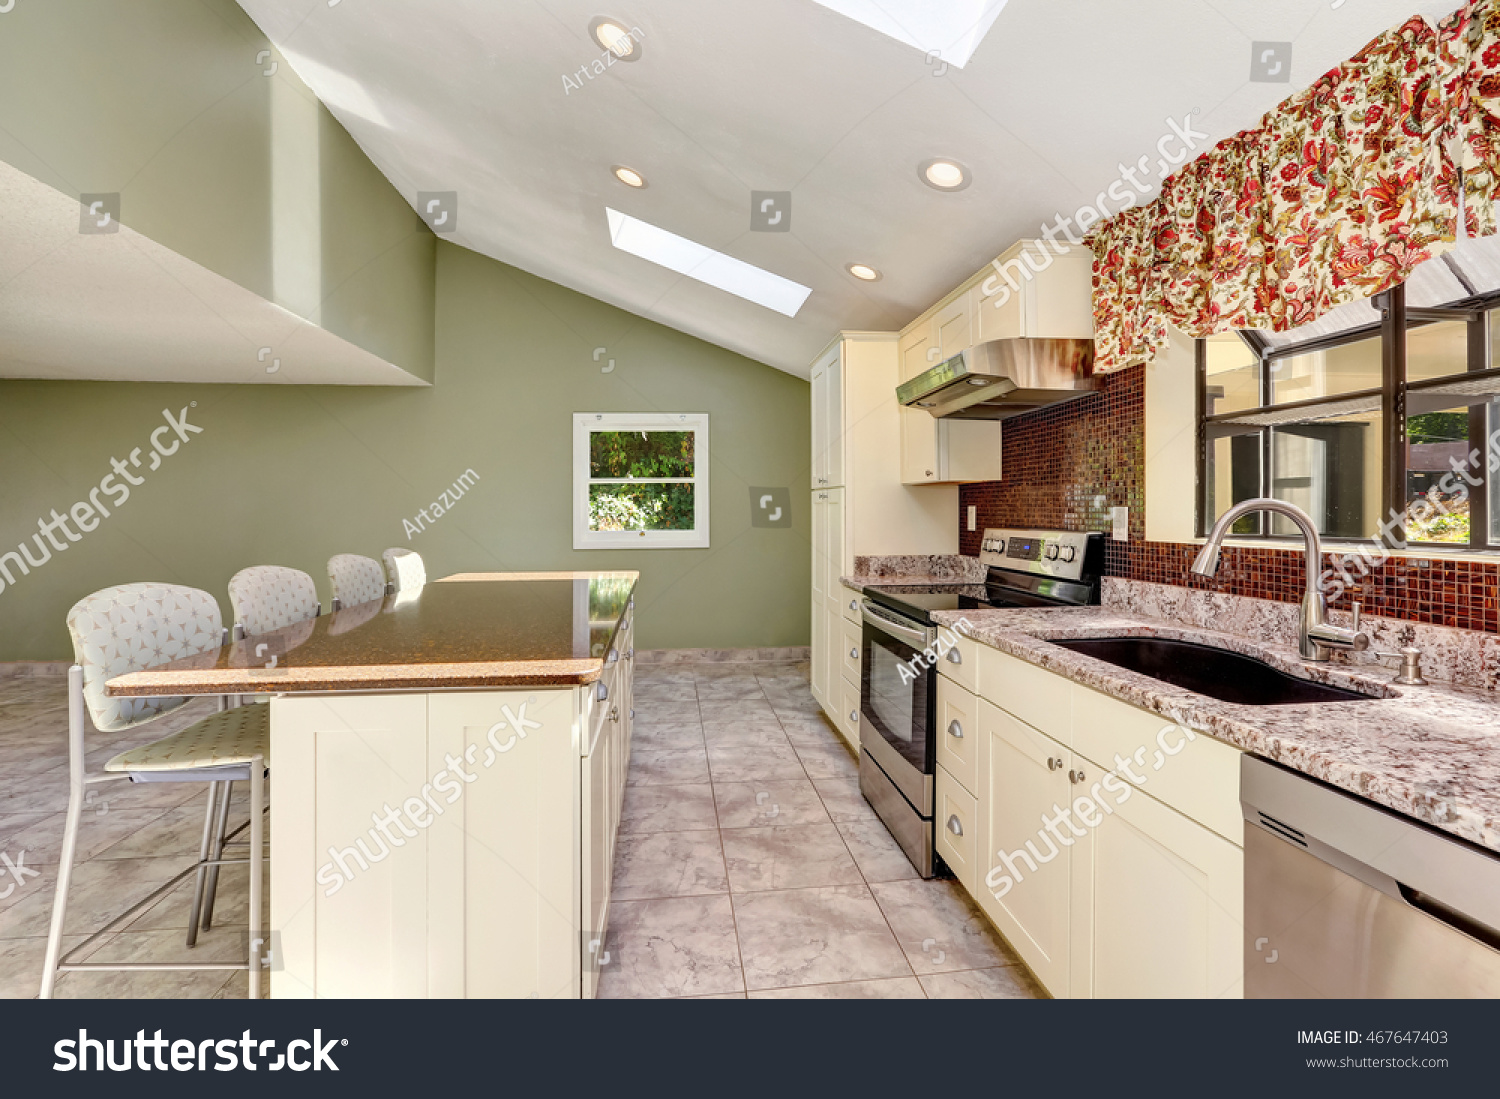 Bright Sunny Kitchen Vaulted Ceiling Skylights Stock Photo Edit